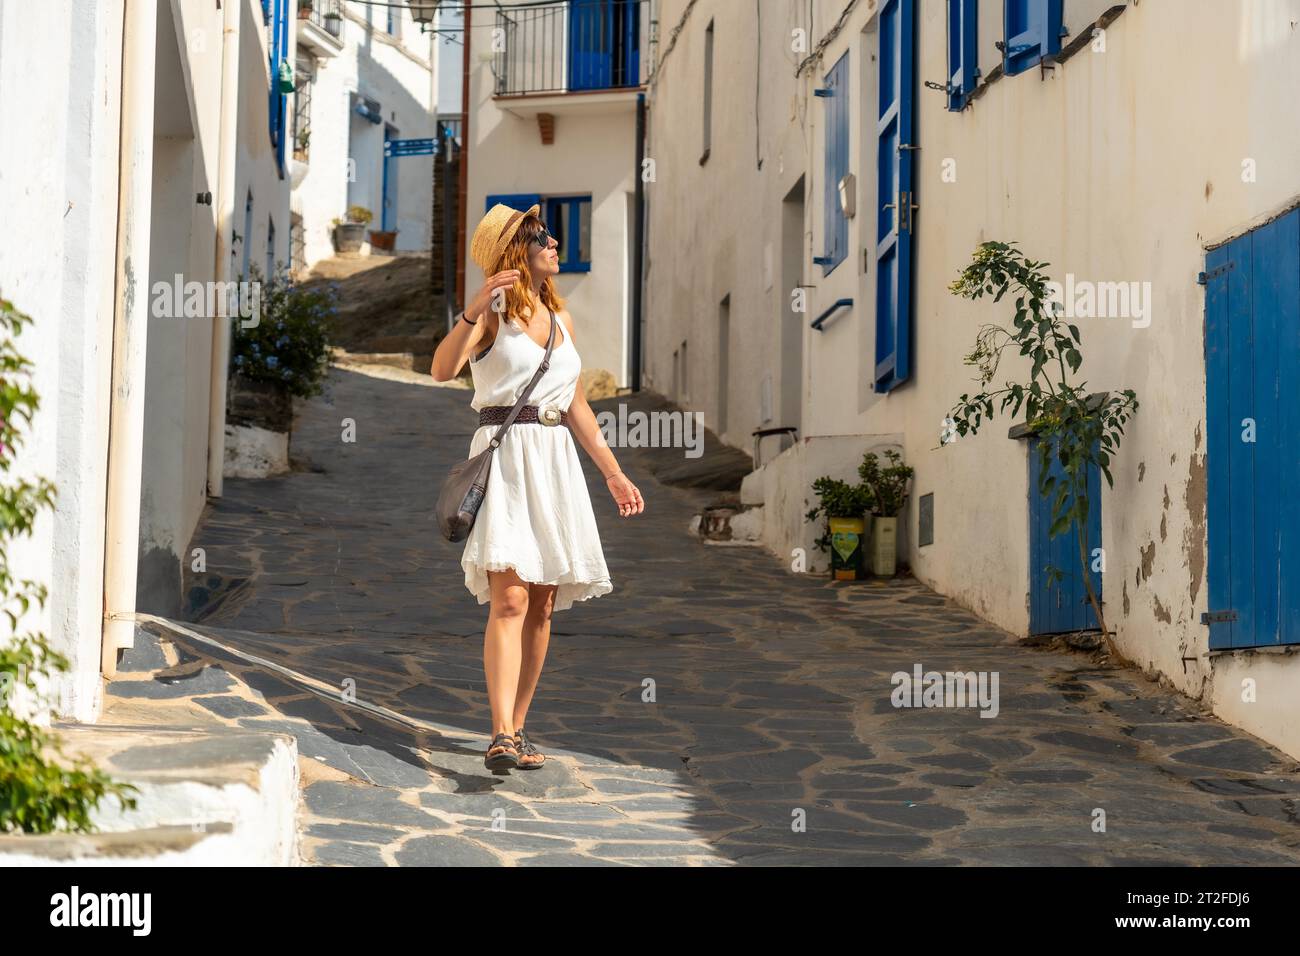 A young tourist with a hat walking through the streets of Cadaques town on the Costa Brava of Catalonia, Gerona, Mediterranean Sea. Spain Stock Photo